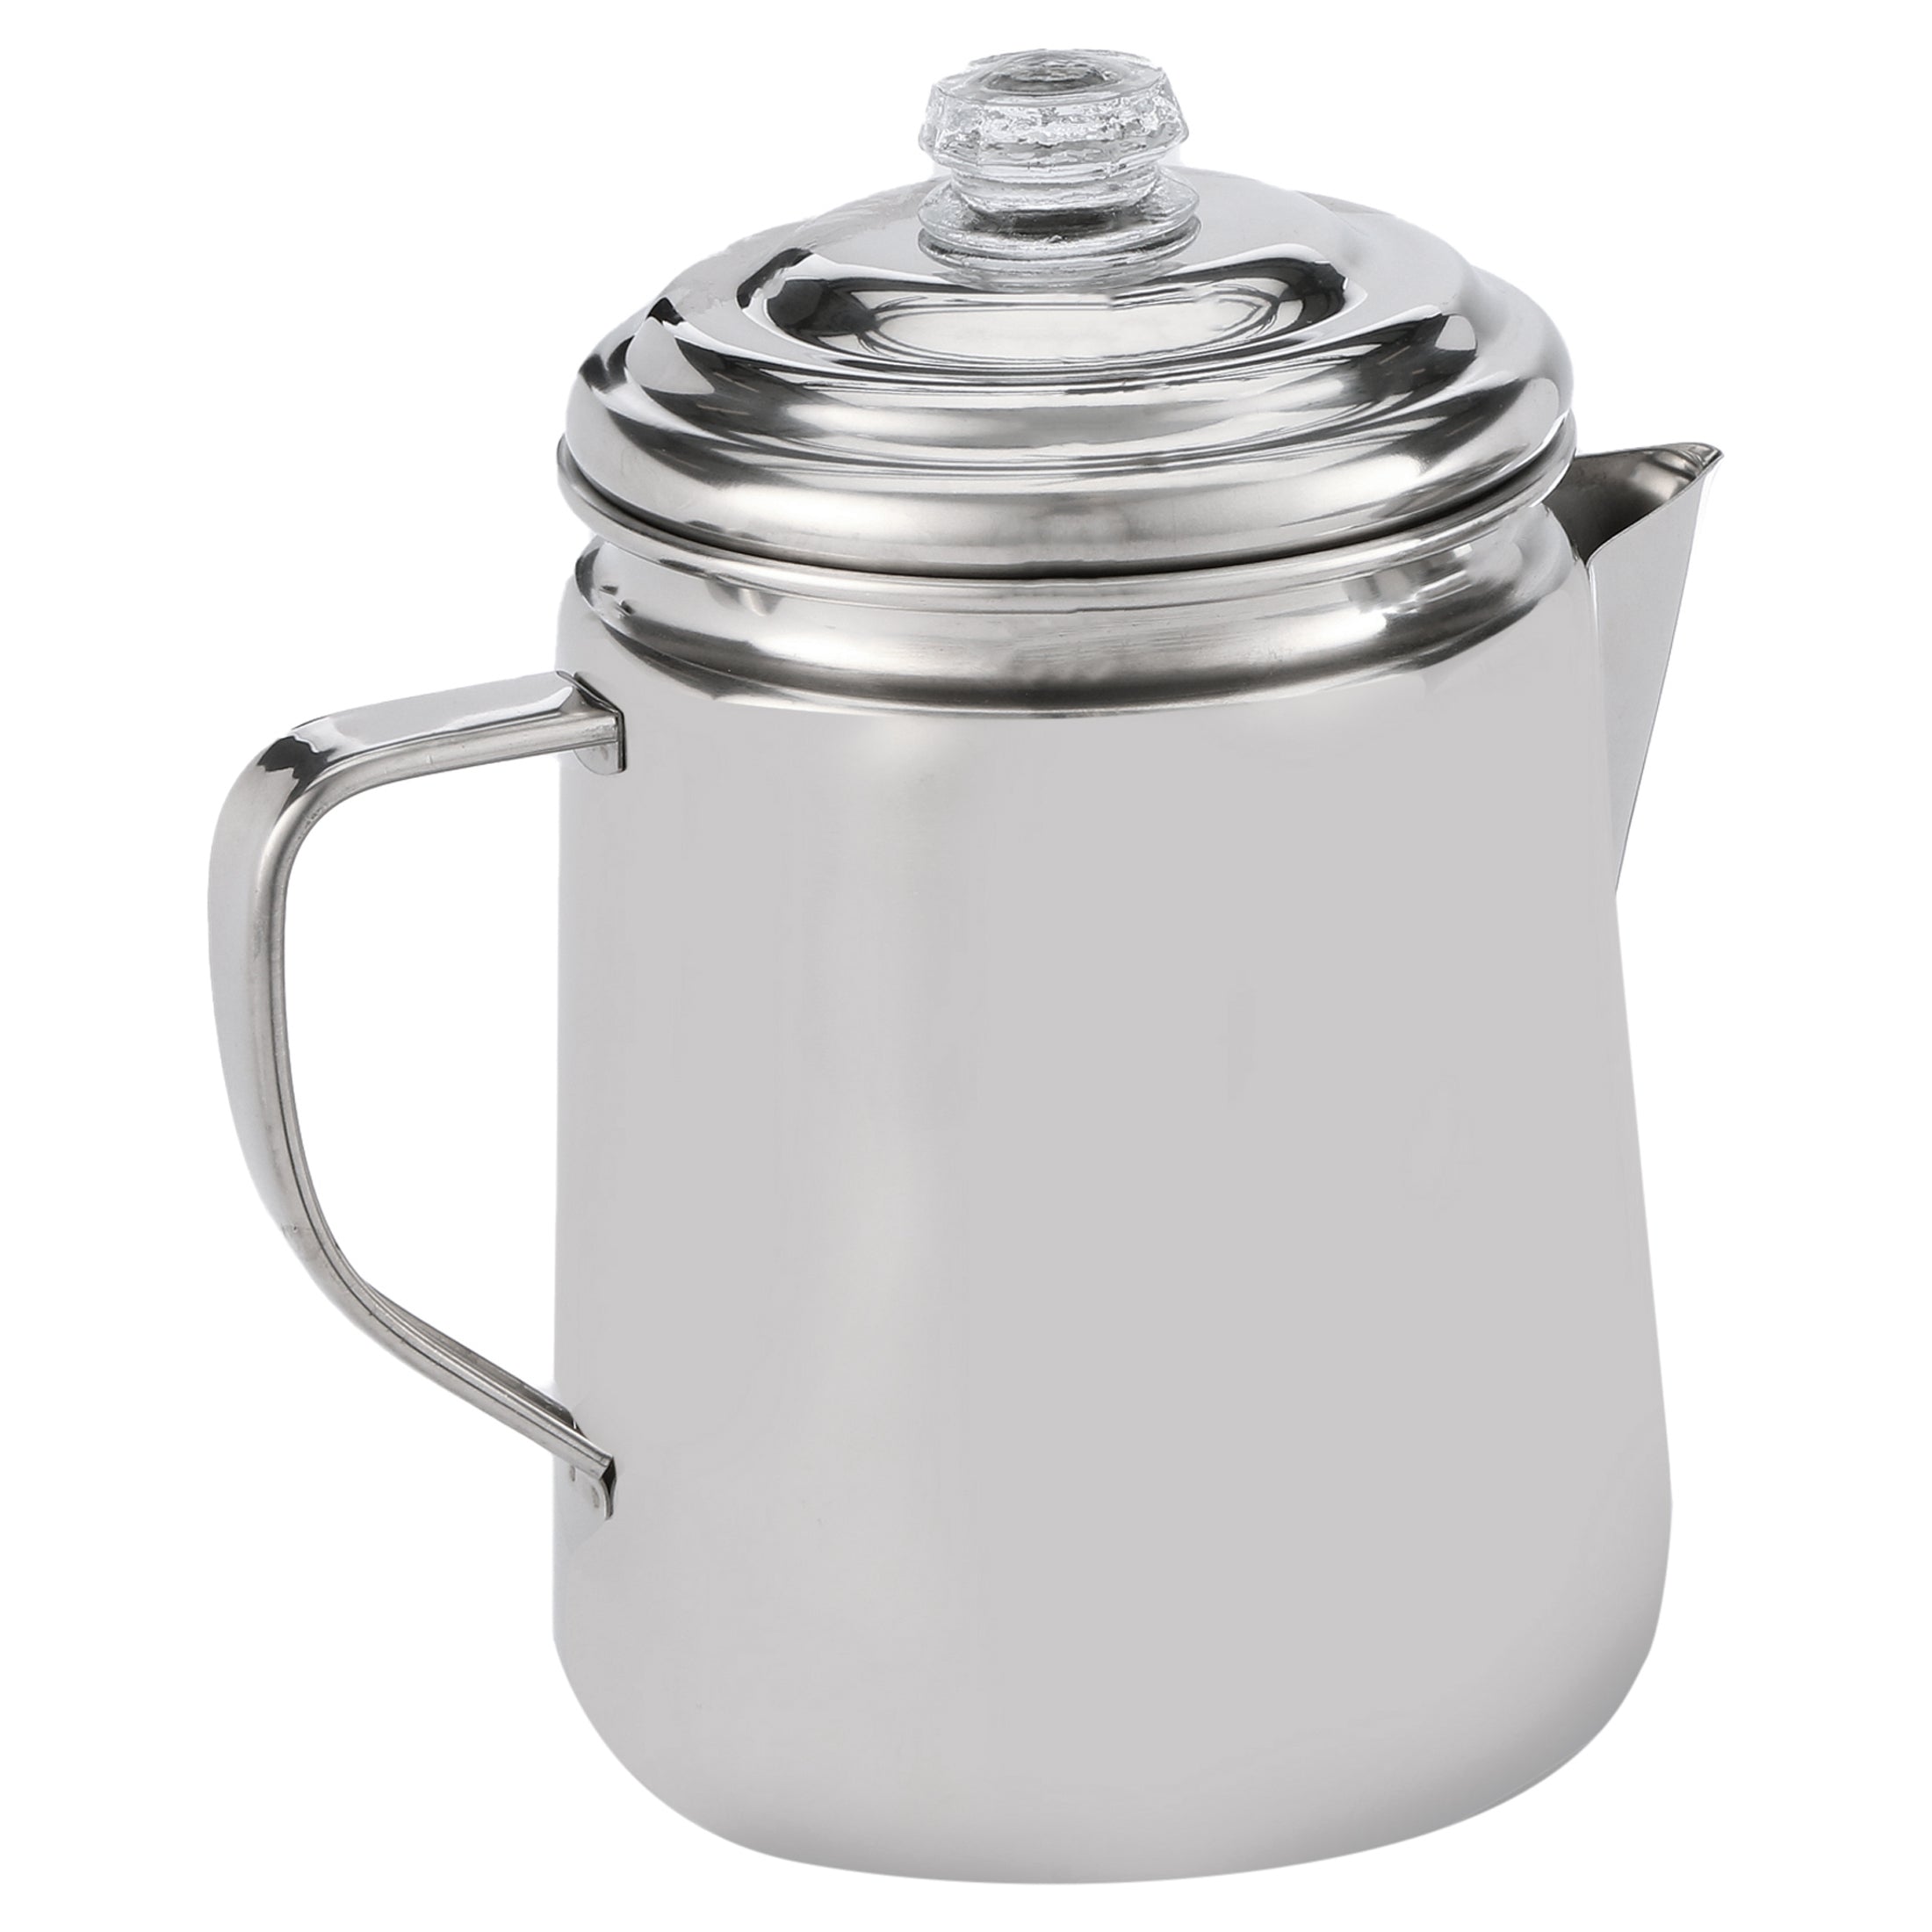 12　Boatyard　Shop　Steel　Cup　Percolator,　Malaysia　Coleman　Stainless